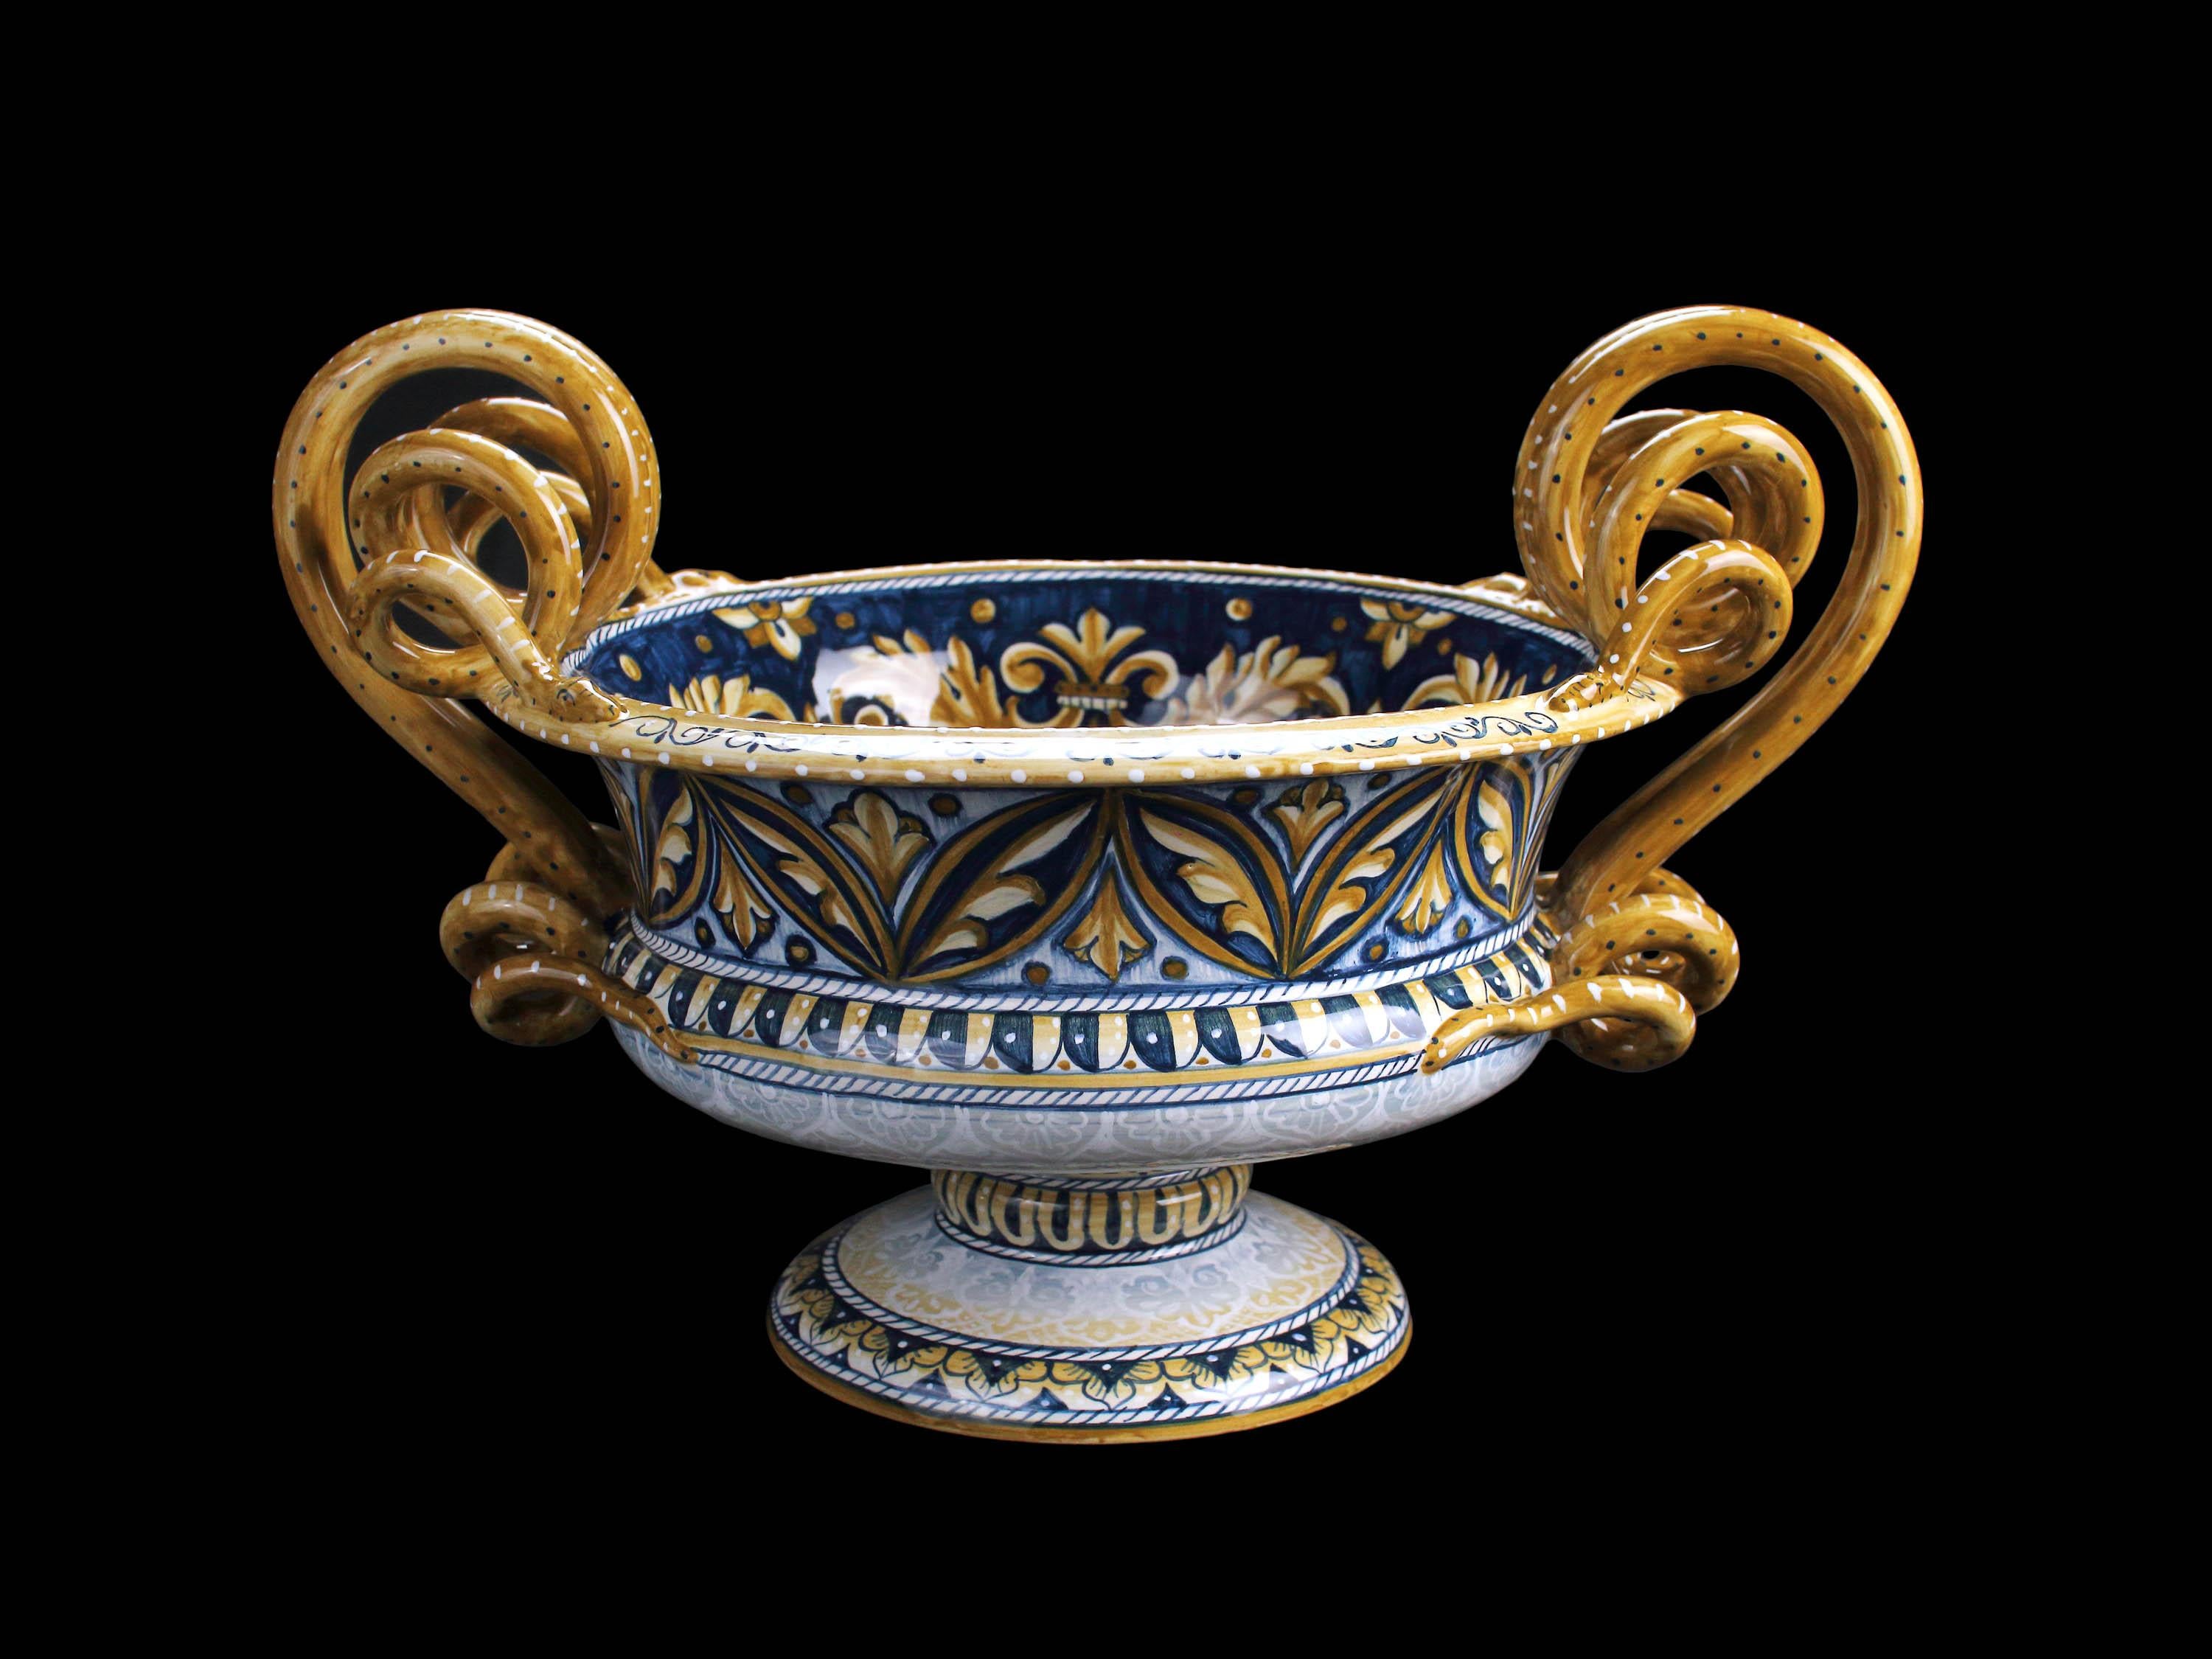 This fine majolica centerpiece is made and hand-painted in Deruta, Italy. The Bowl recalls the ancient structure of the Greek cups that were used to mix water and wine, while its decoration reinterprets the opulent ornaments of Deruta tradition,